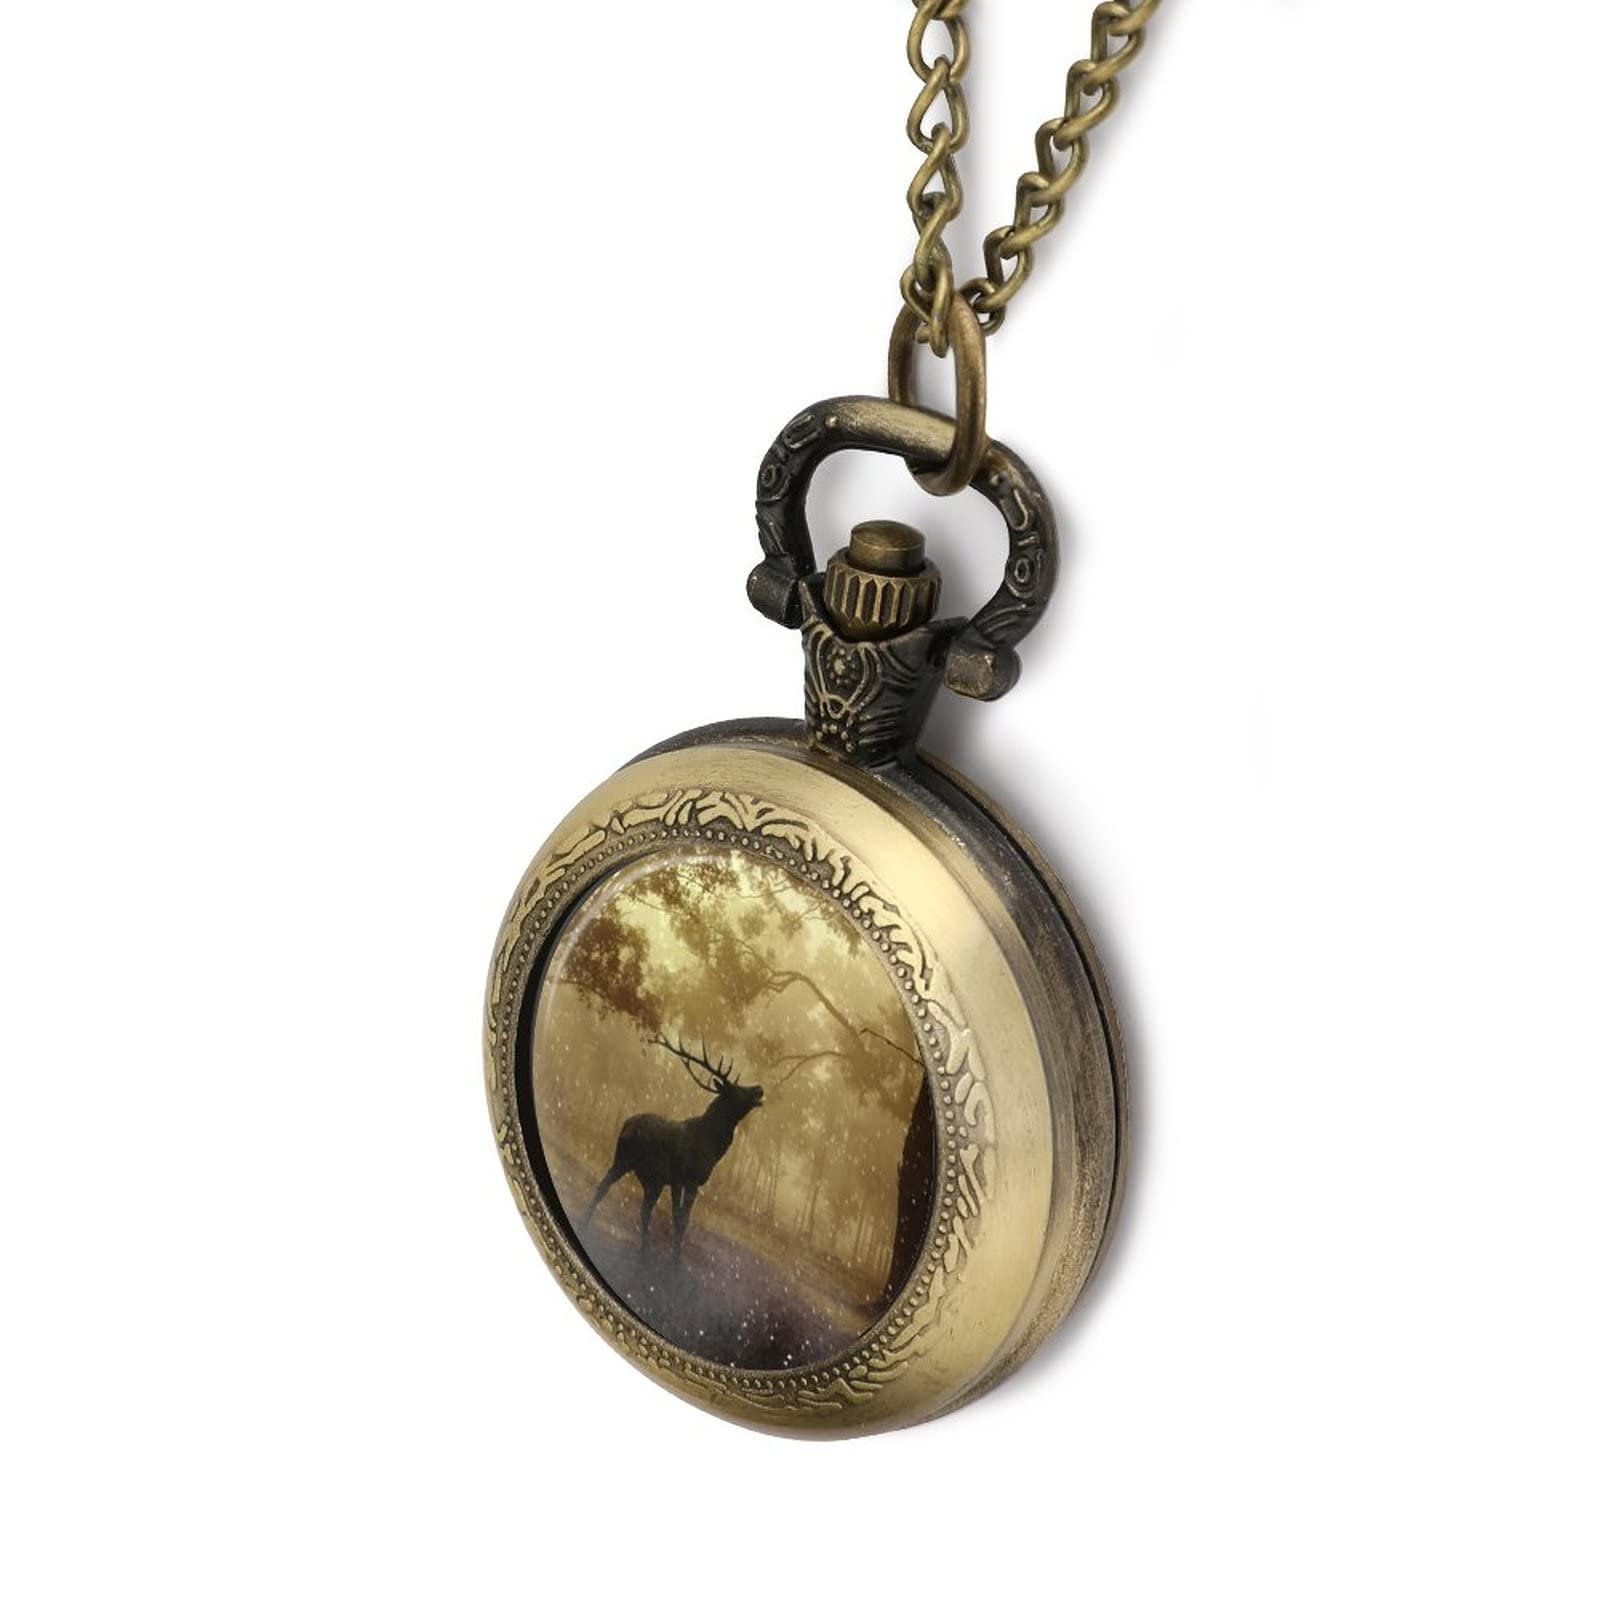 Deer Autumn Vintage Pocket Watch with Chain Gifts for Men Women Christmas Graduation Birthday Fathers Day